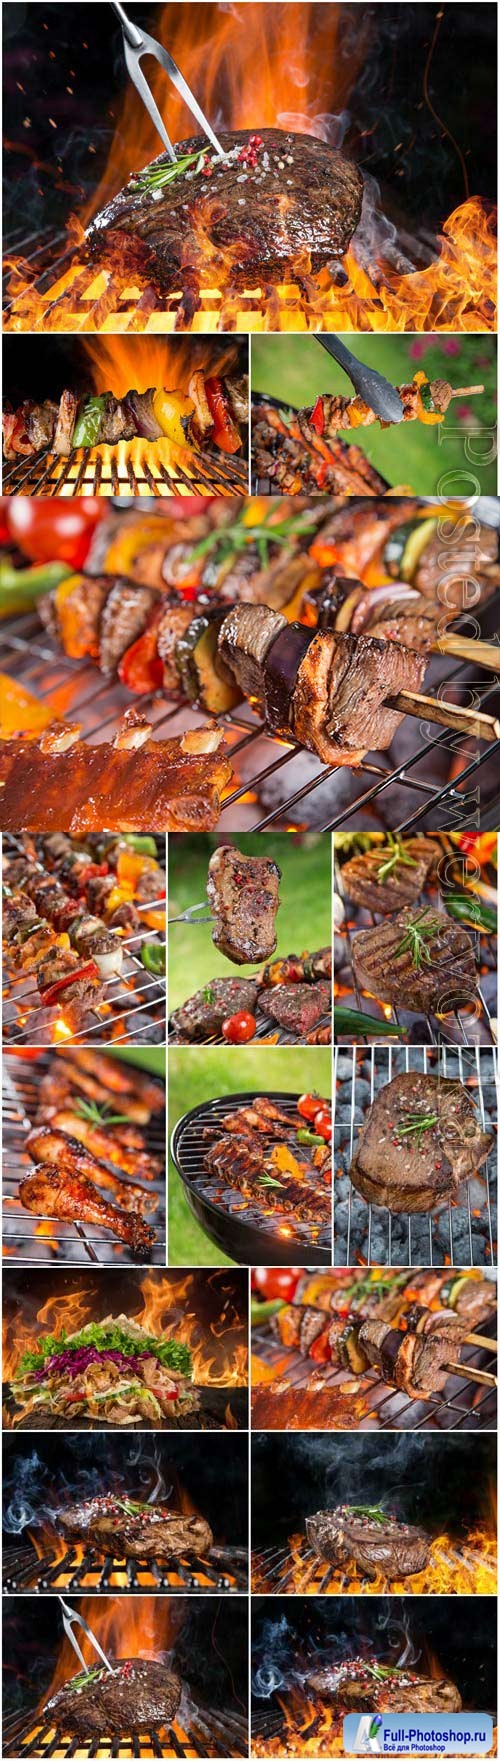 Barbecue and kebab stock photo